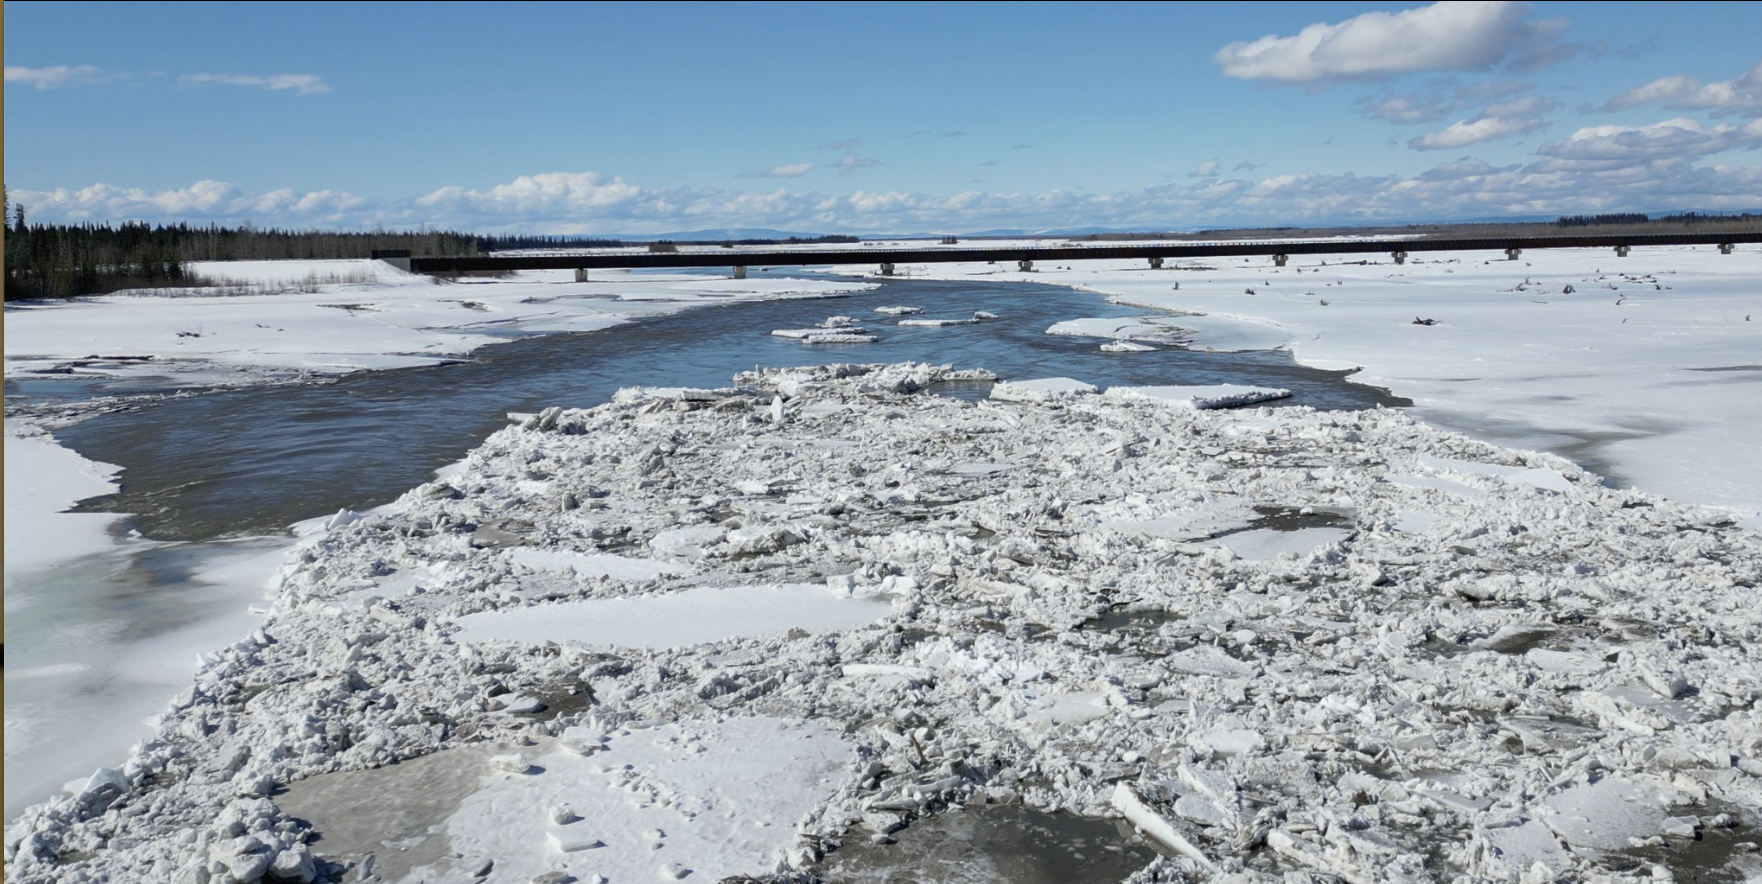 A river mostly covered in ice on a sunny day with a bridge in the distance.